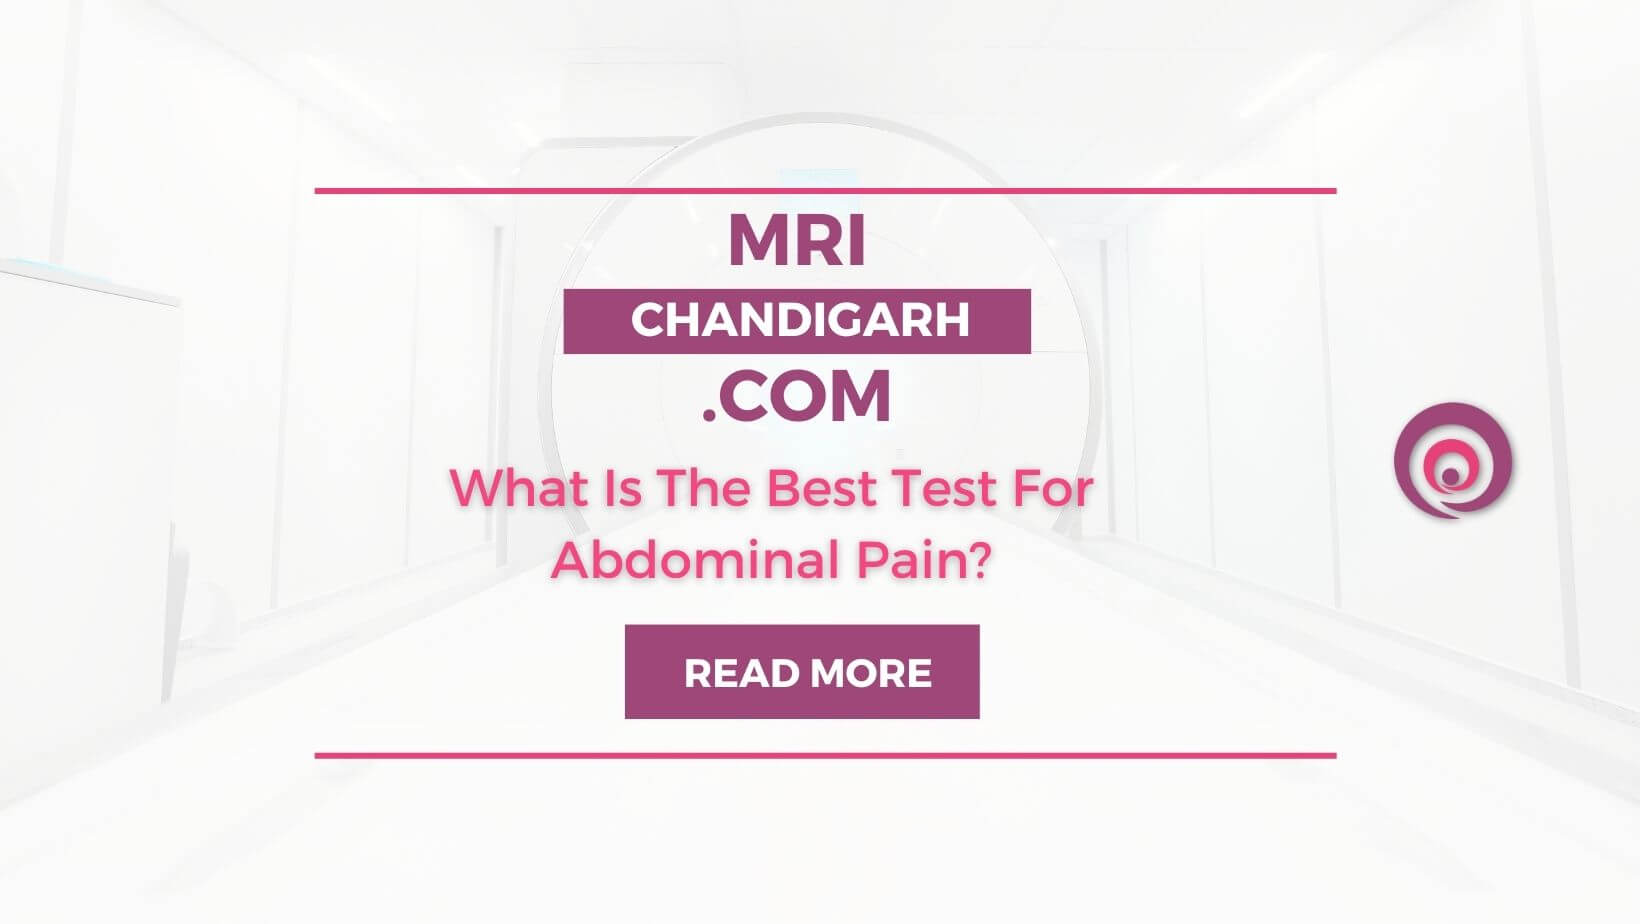 What Is The Best Test For Abdominal Pain?